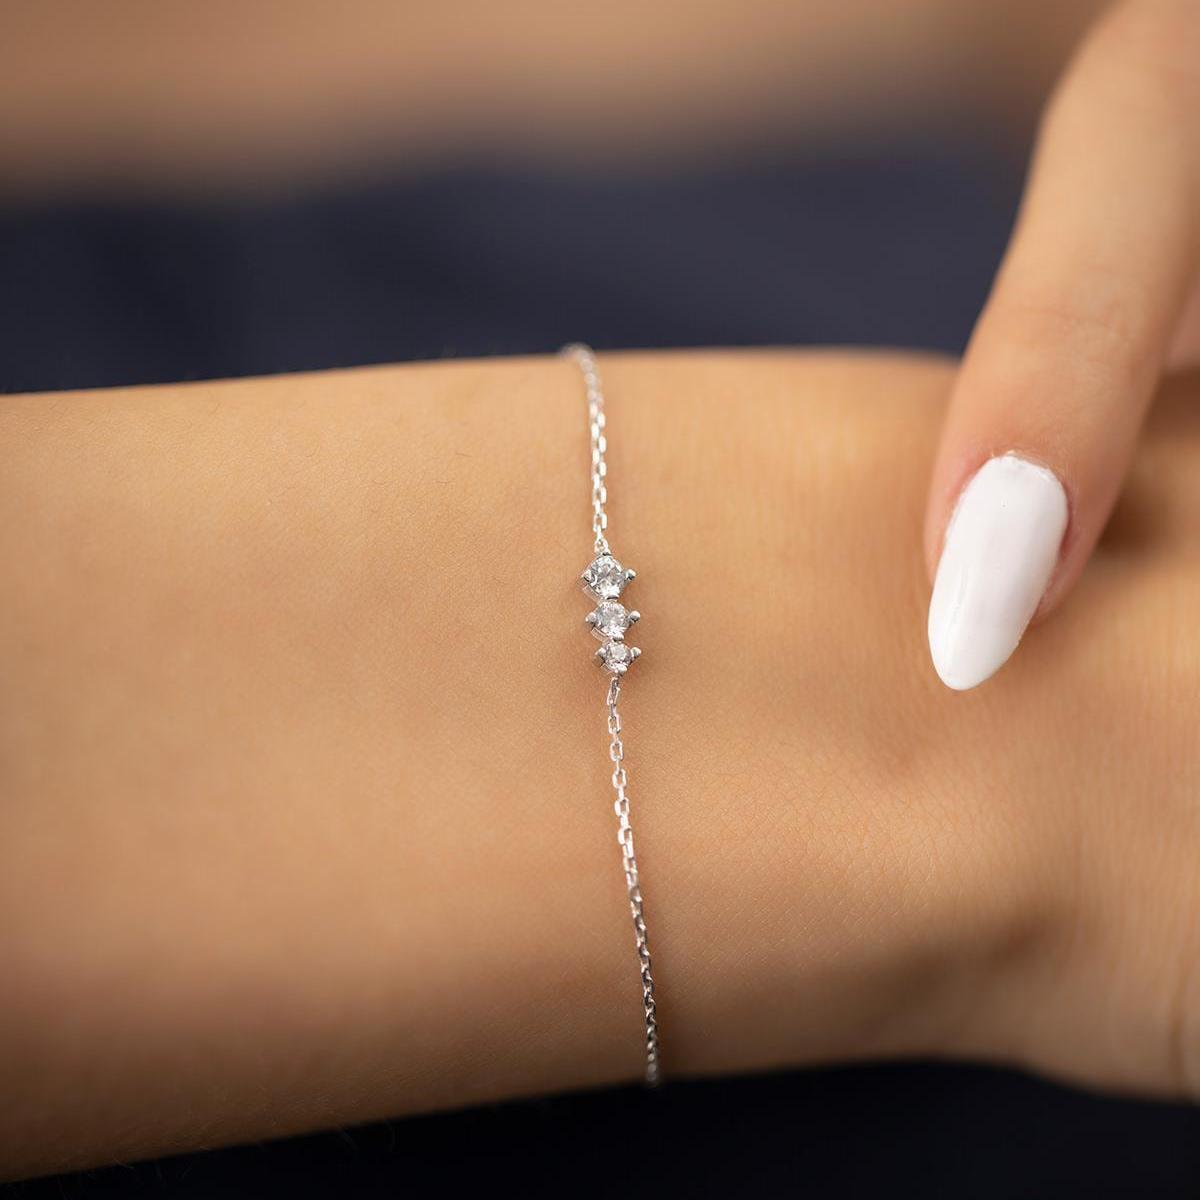 Triple Diamond Solitaire Silver Bracelet • Bridesmaid Gift For Wedding - Trending Silver Gifts